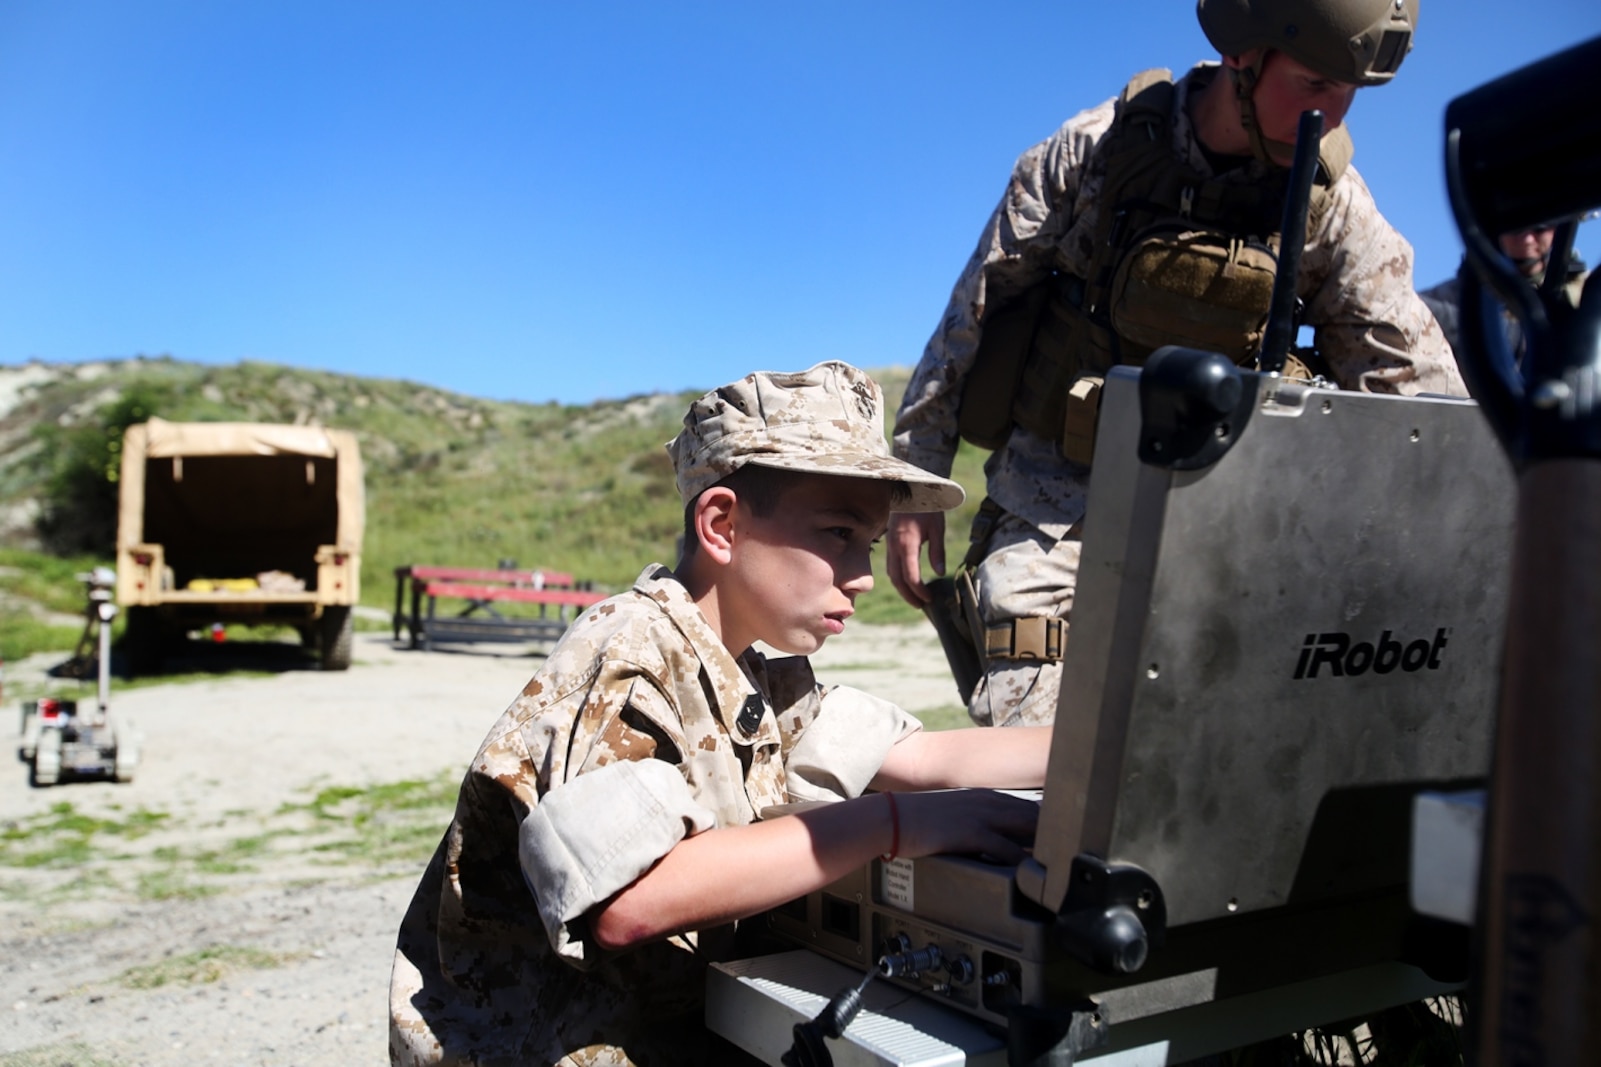 Nathan Aldaco, a 12 year-old boy with hypoplastic left heart syndrome, controls a Pacbot during a Make-A-Wish event supported by 7th Engineer Support Battalion, 1st Marine Logistics Group, aboard Camp Pendleton, Calif., March 24, 2016. Marines with 7th ESB and Explosive Ordnance Disposal helped to make Nathan’s wish of becoming a Marine come true by demonstrating the capabilities of their EOD robots and detonating TNT, C4, dynamite and blasting caps, while the heavy equipment operators gave him the opportunity to ride the D7 dozer and the excavator, in which he dug a pit, built a berm, and broke several large tree trunks.  (U.S. Marine Corps photo by Sgt. Laura Gauna/released)